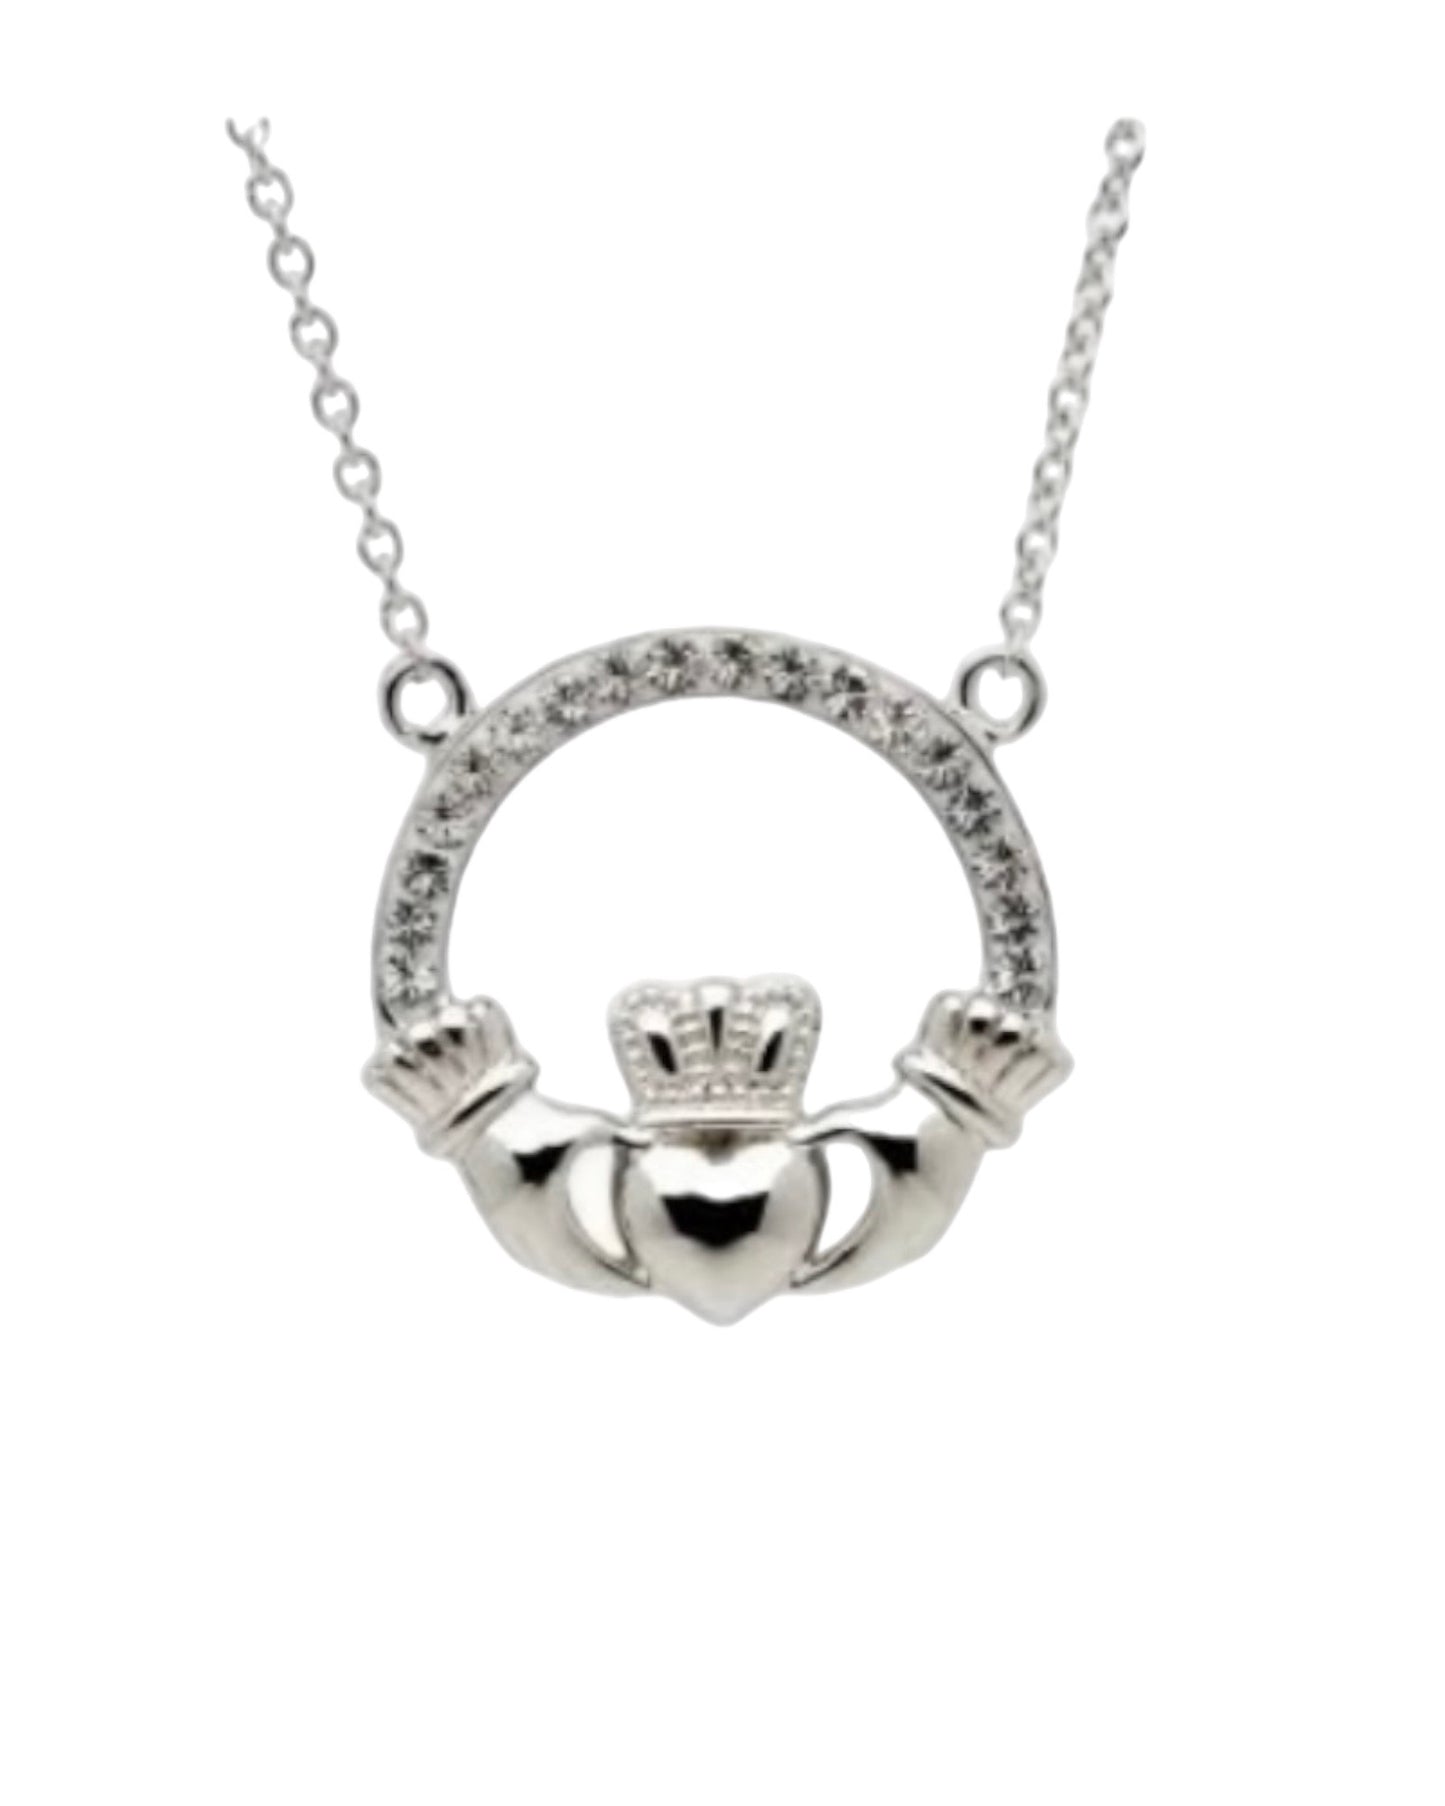 Shanore Claddagh Necklace Encrusted With Crystals